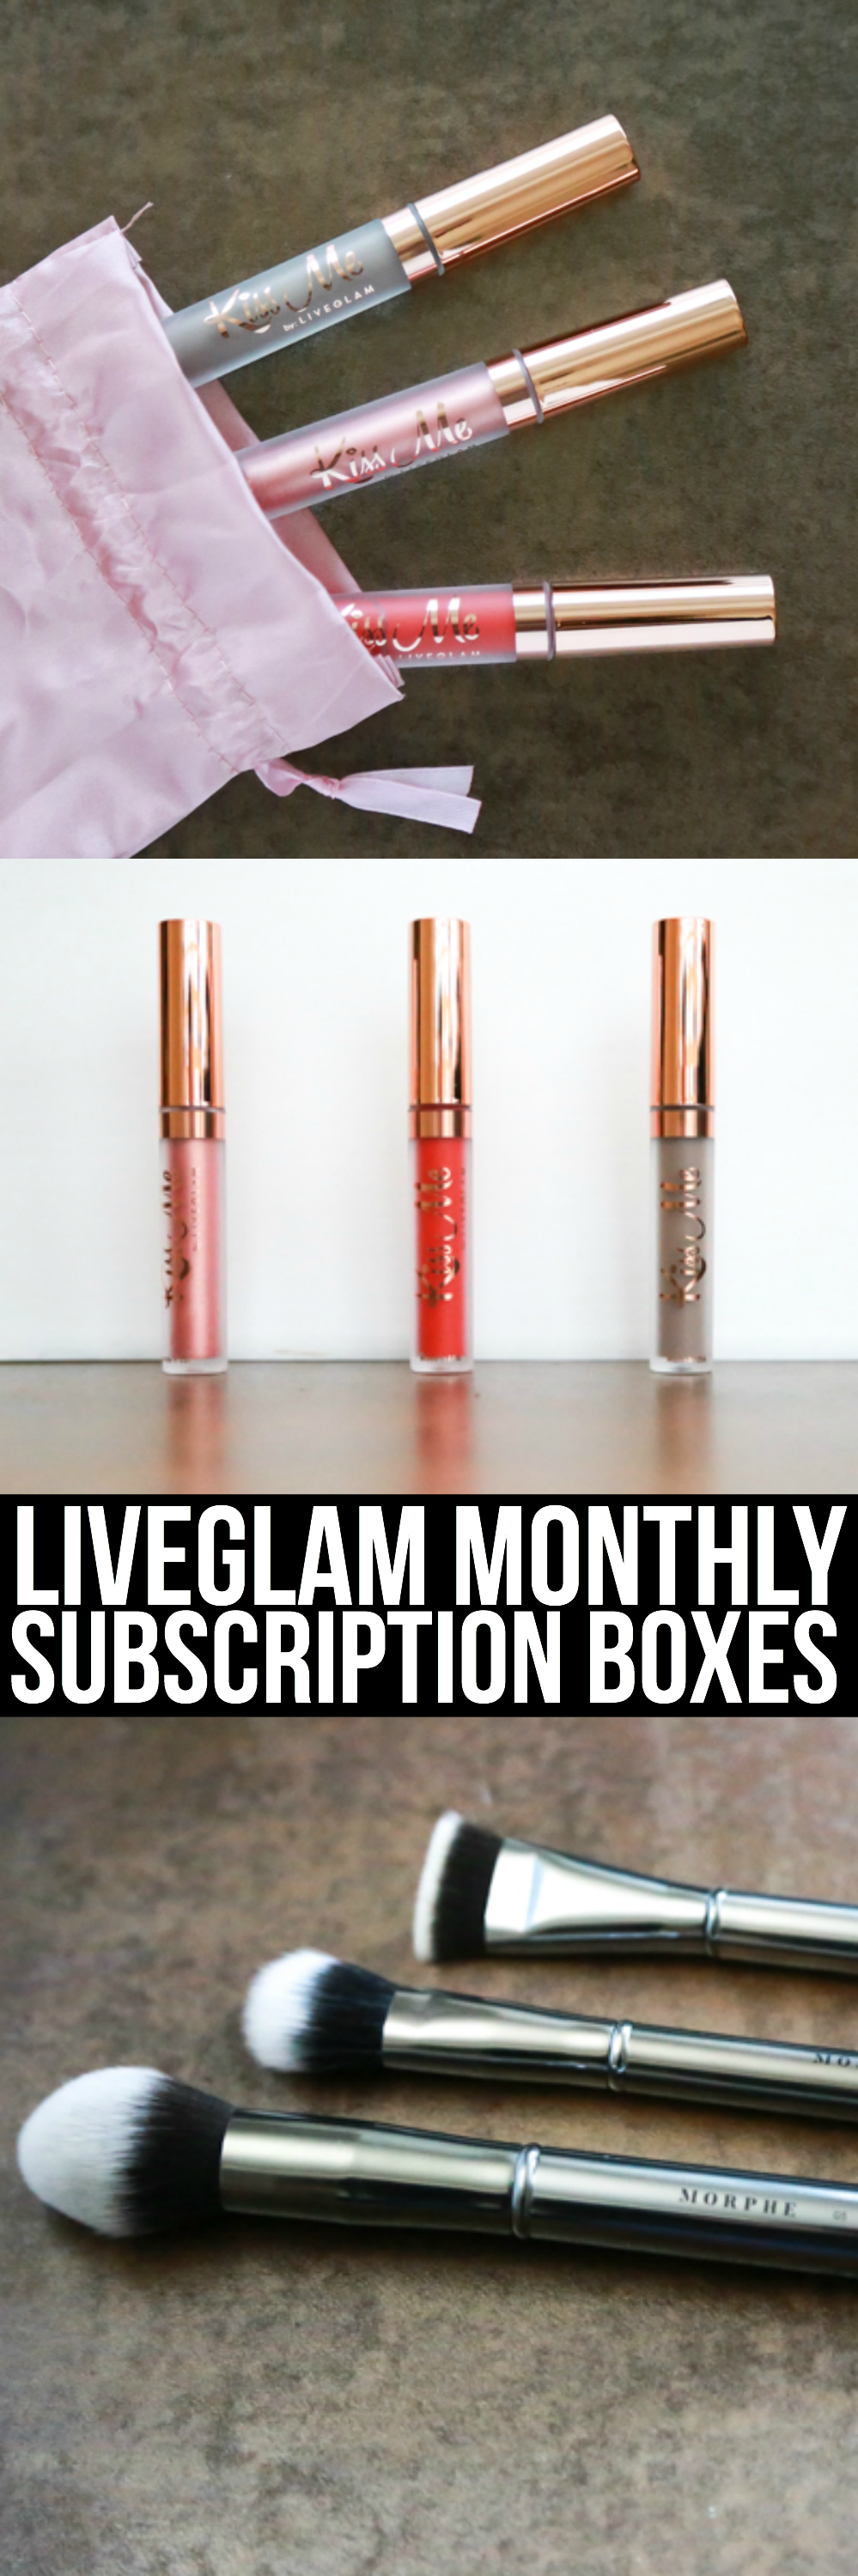 If you're looking for a makeup bestie, the LiveGlam Monthly Subscription Boxes are perfect for you! You choose what you need, and LiveGlam supplies it.